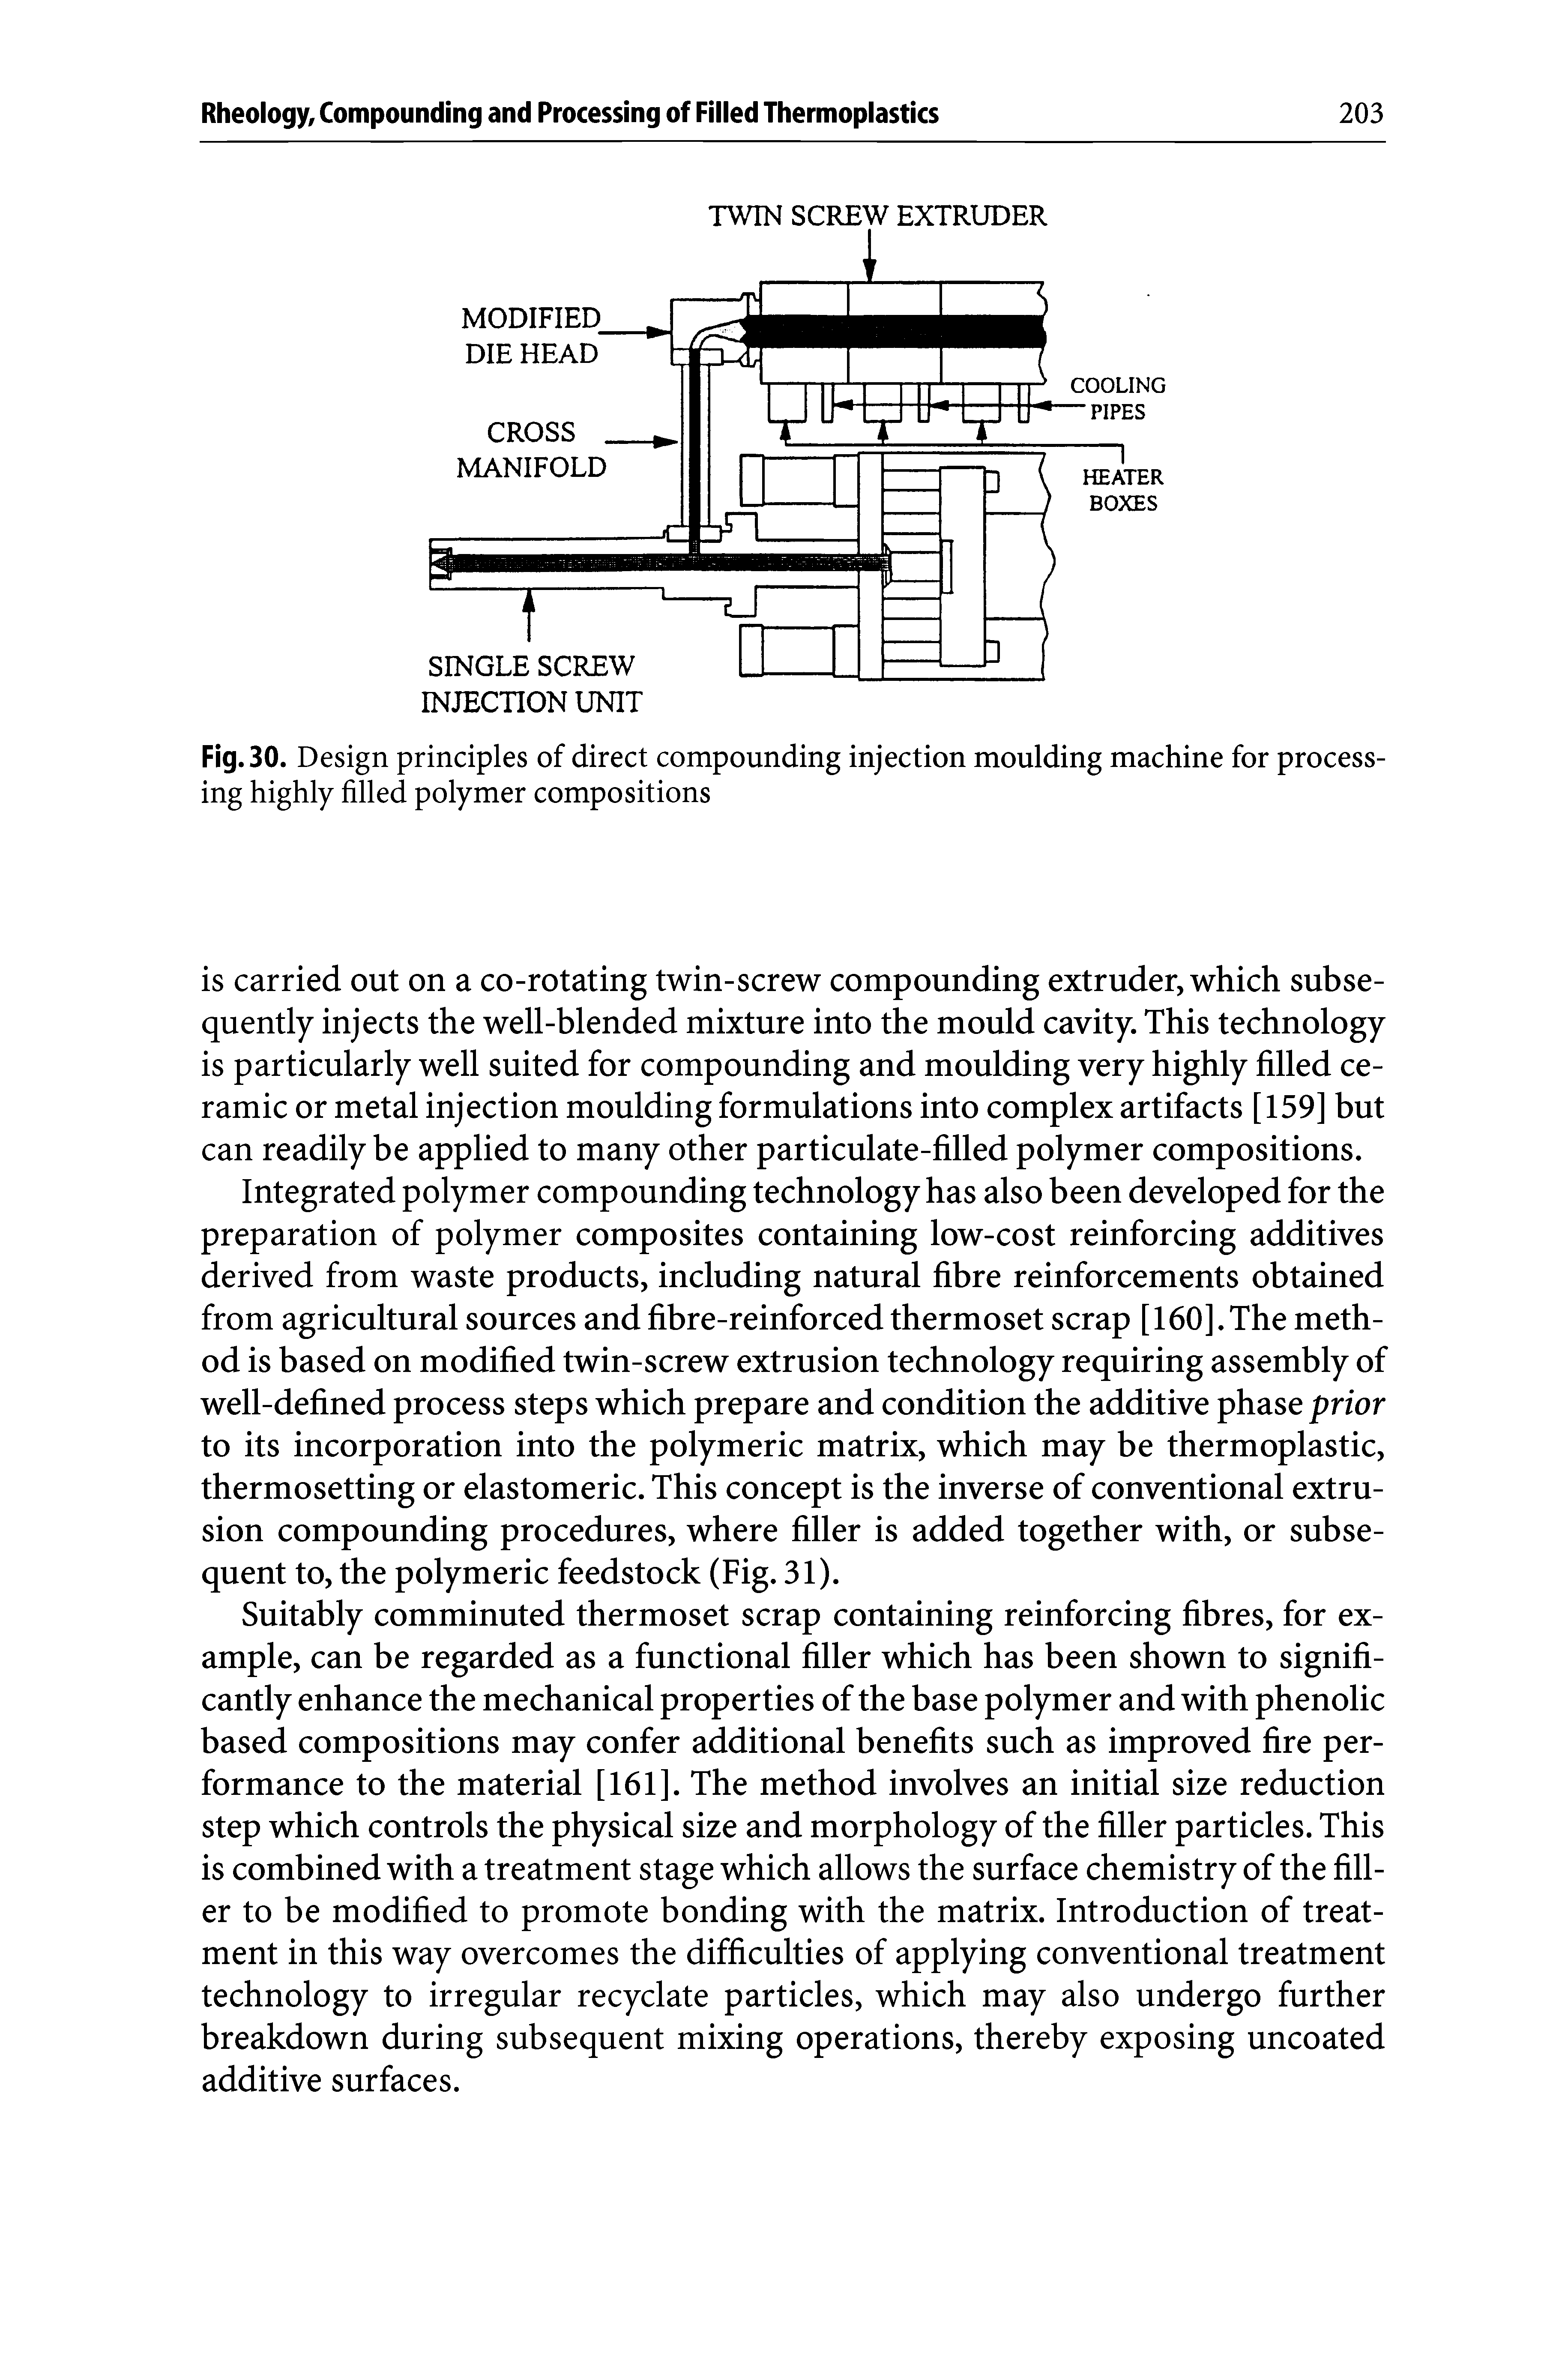 Fig. 30. Design principles of direct compounding injection moulding machine for processing highly filled polymer compositions...